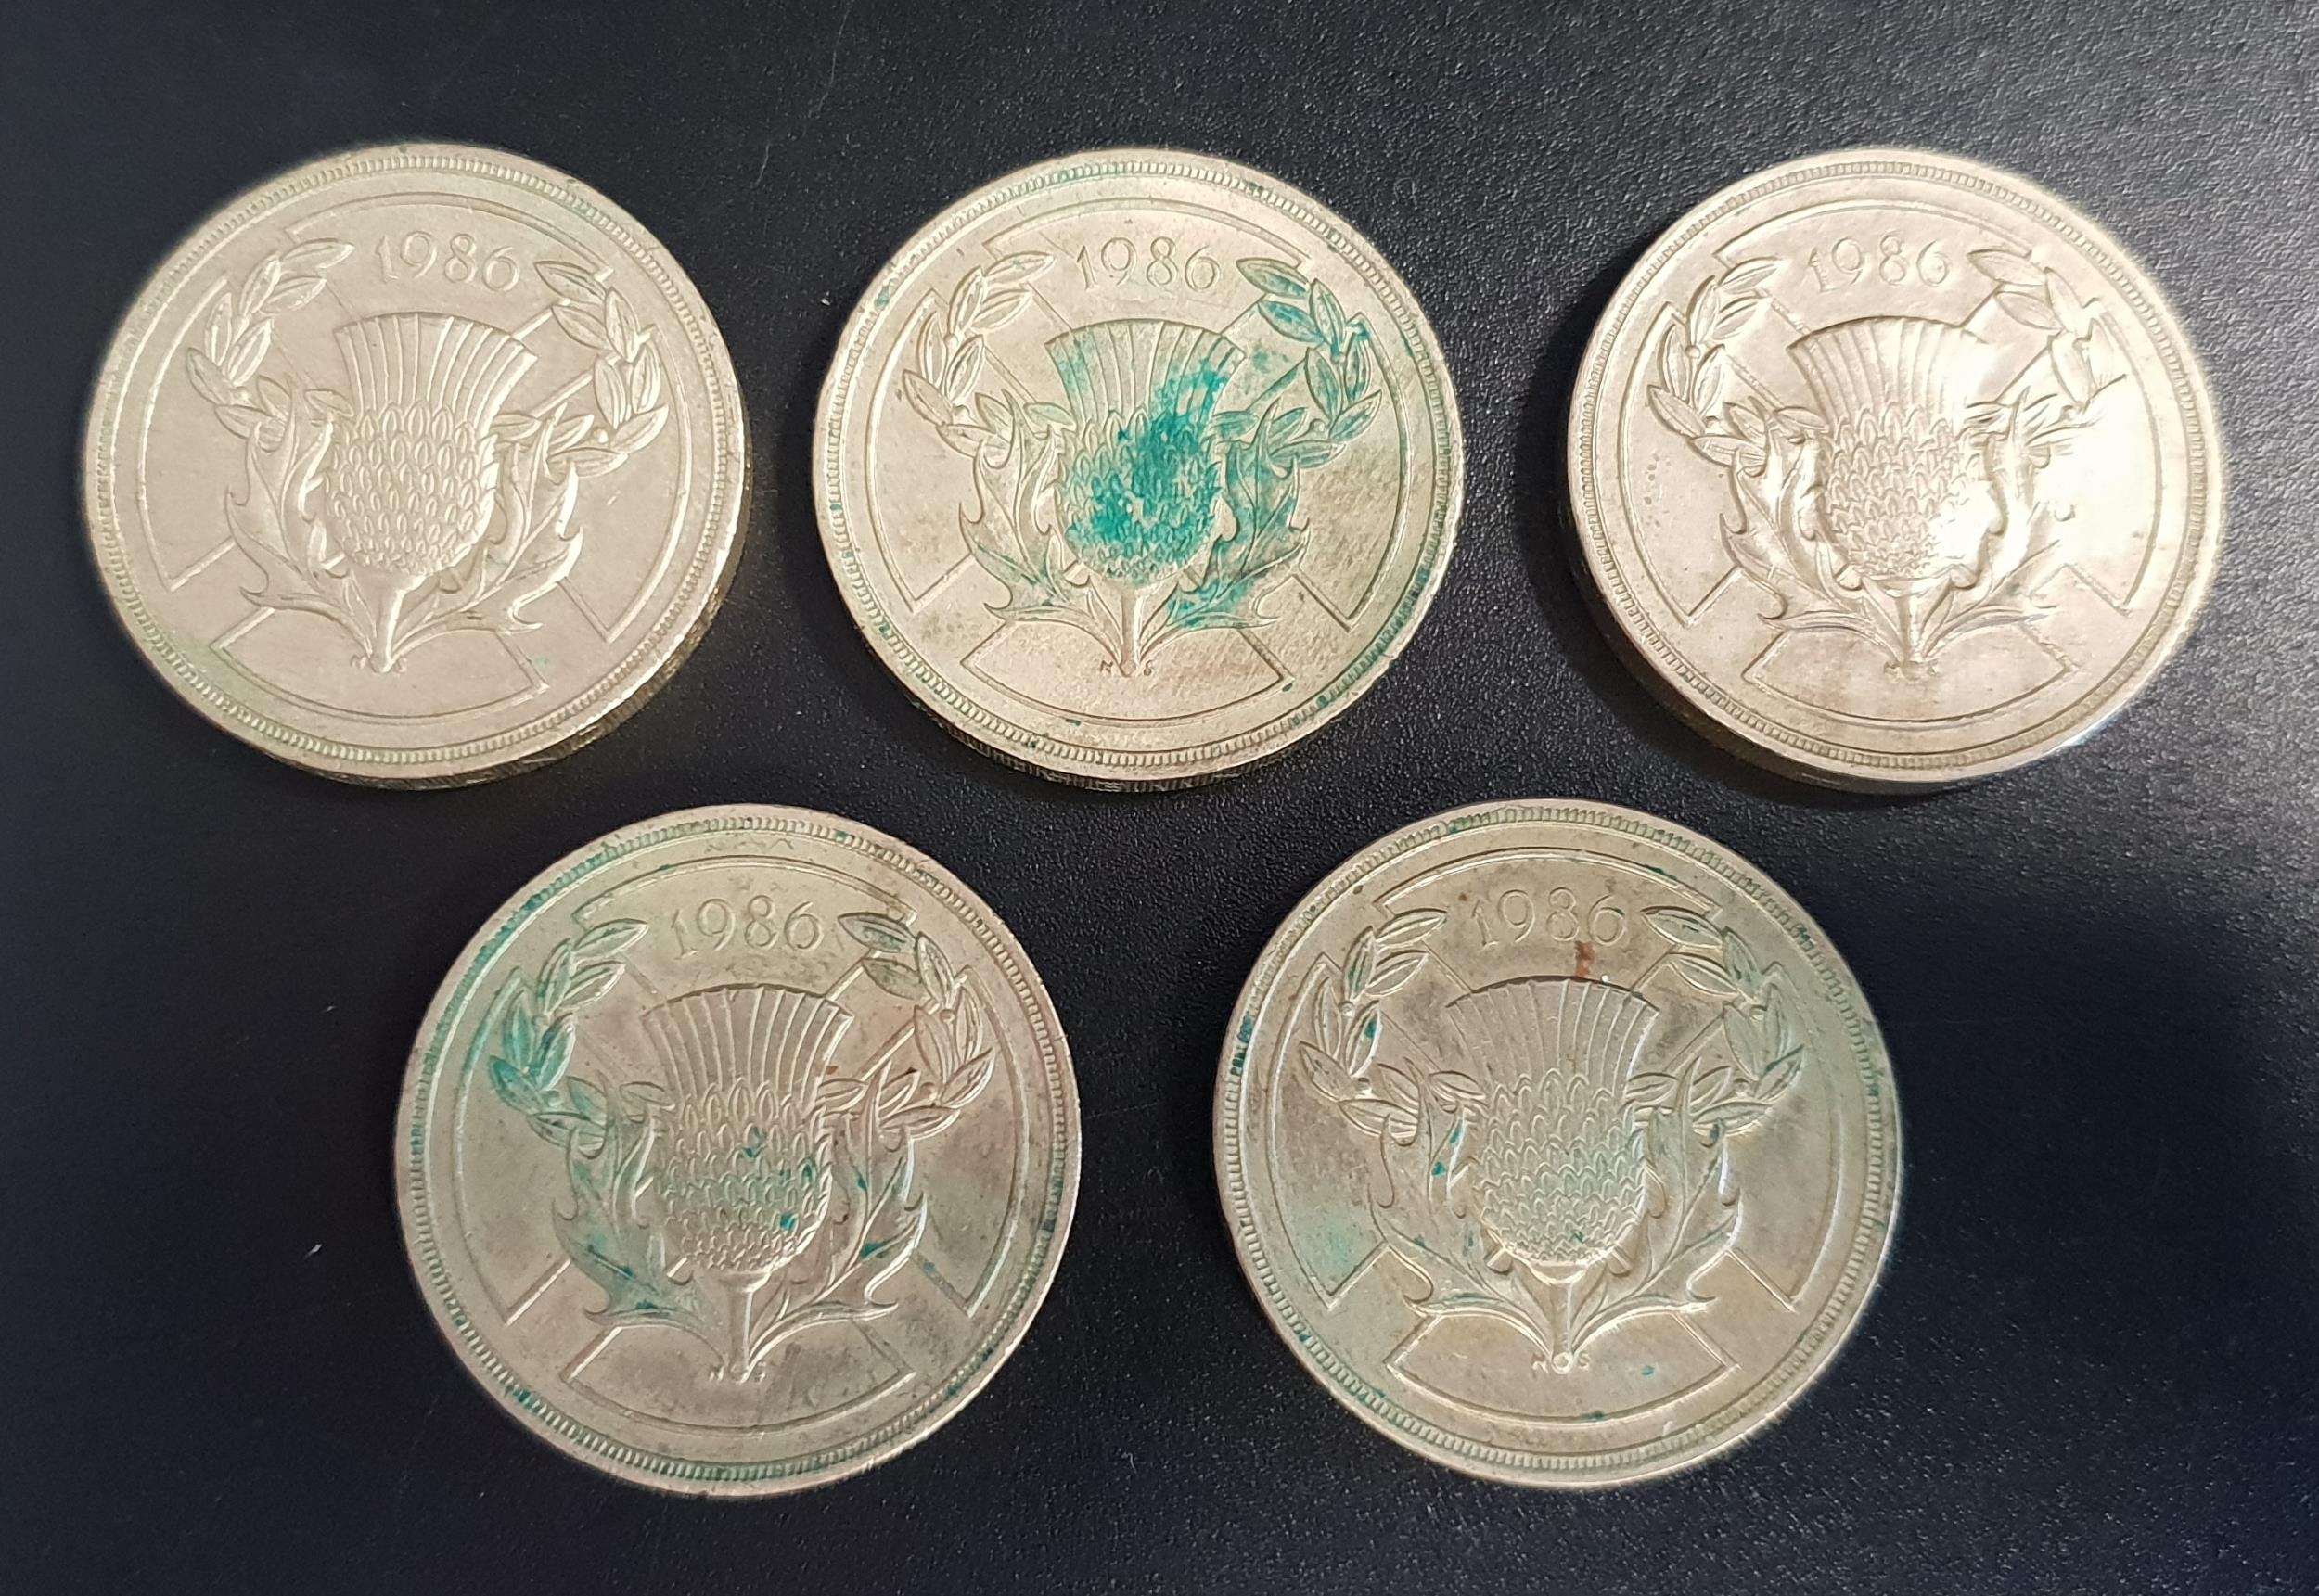 FIVE 1986 SCOTLAND COMMONWEALTH GAMES £2 COINS